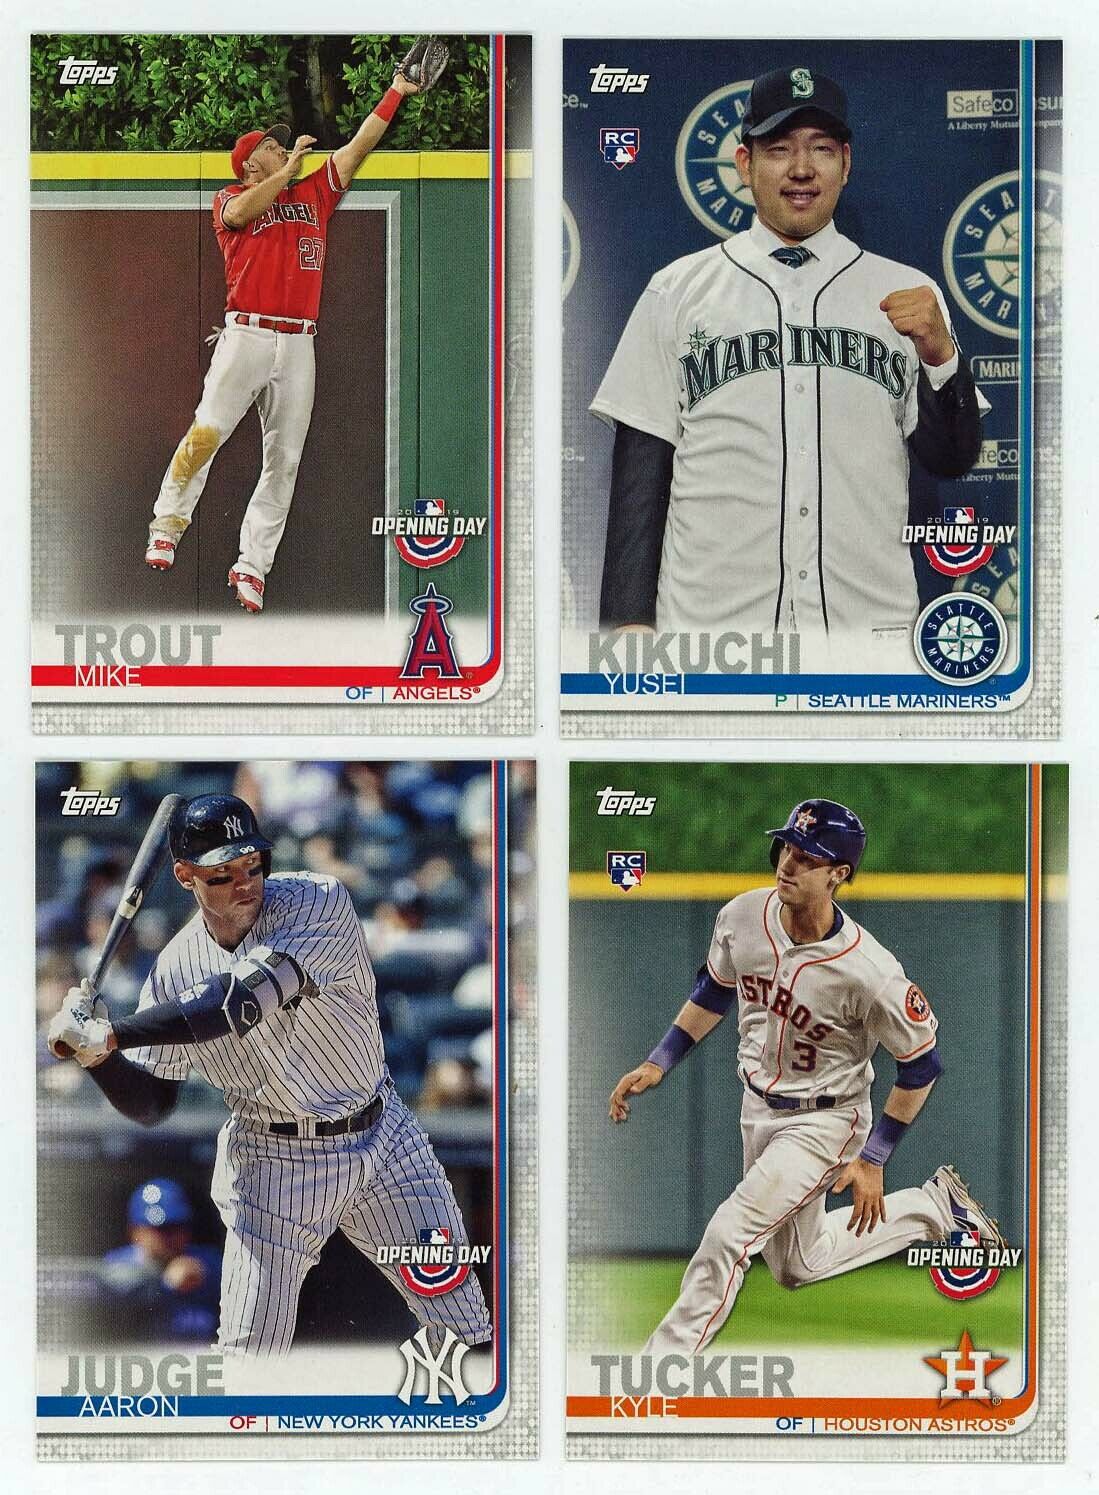 Houston Astros/Complete 2019 Topps (Series 1 and 2) Baseball Team